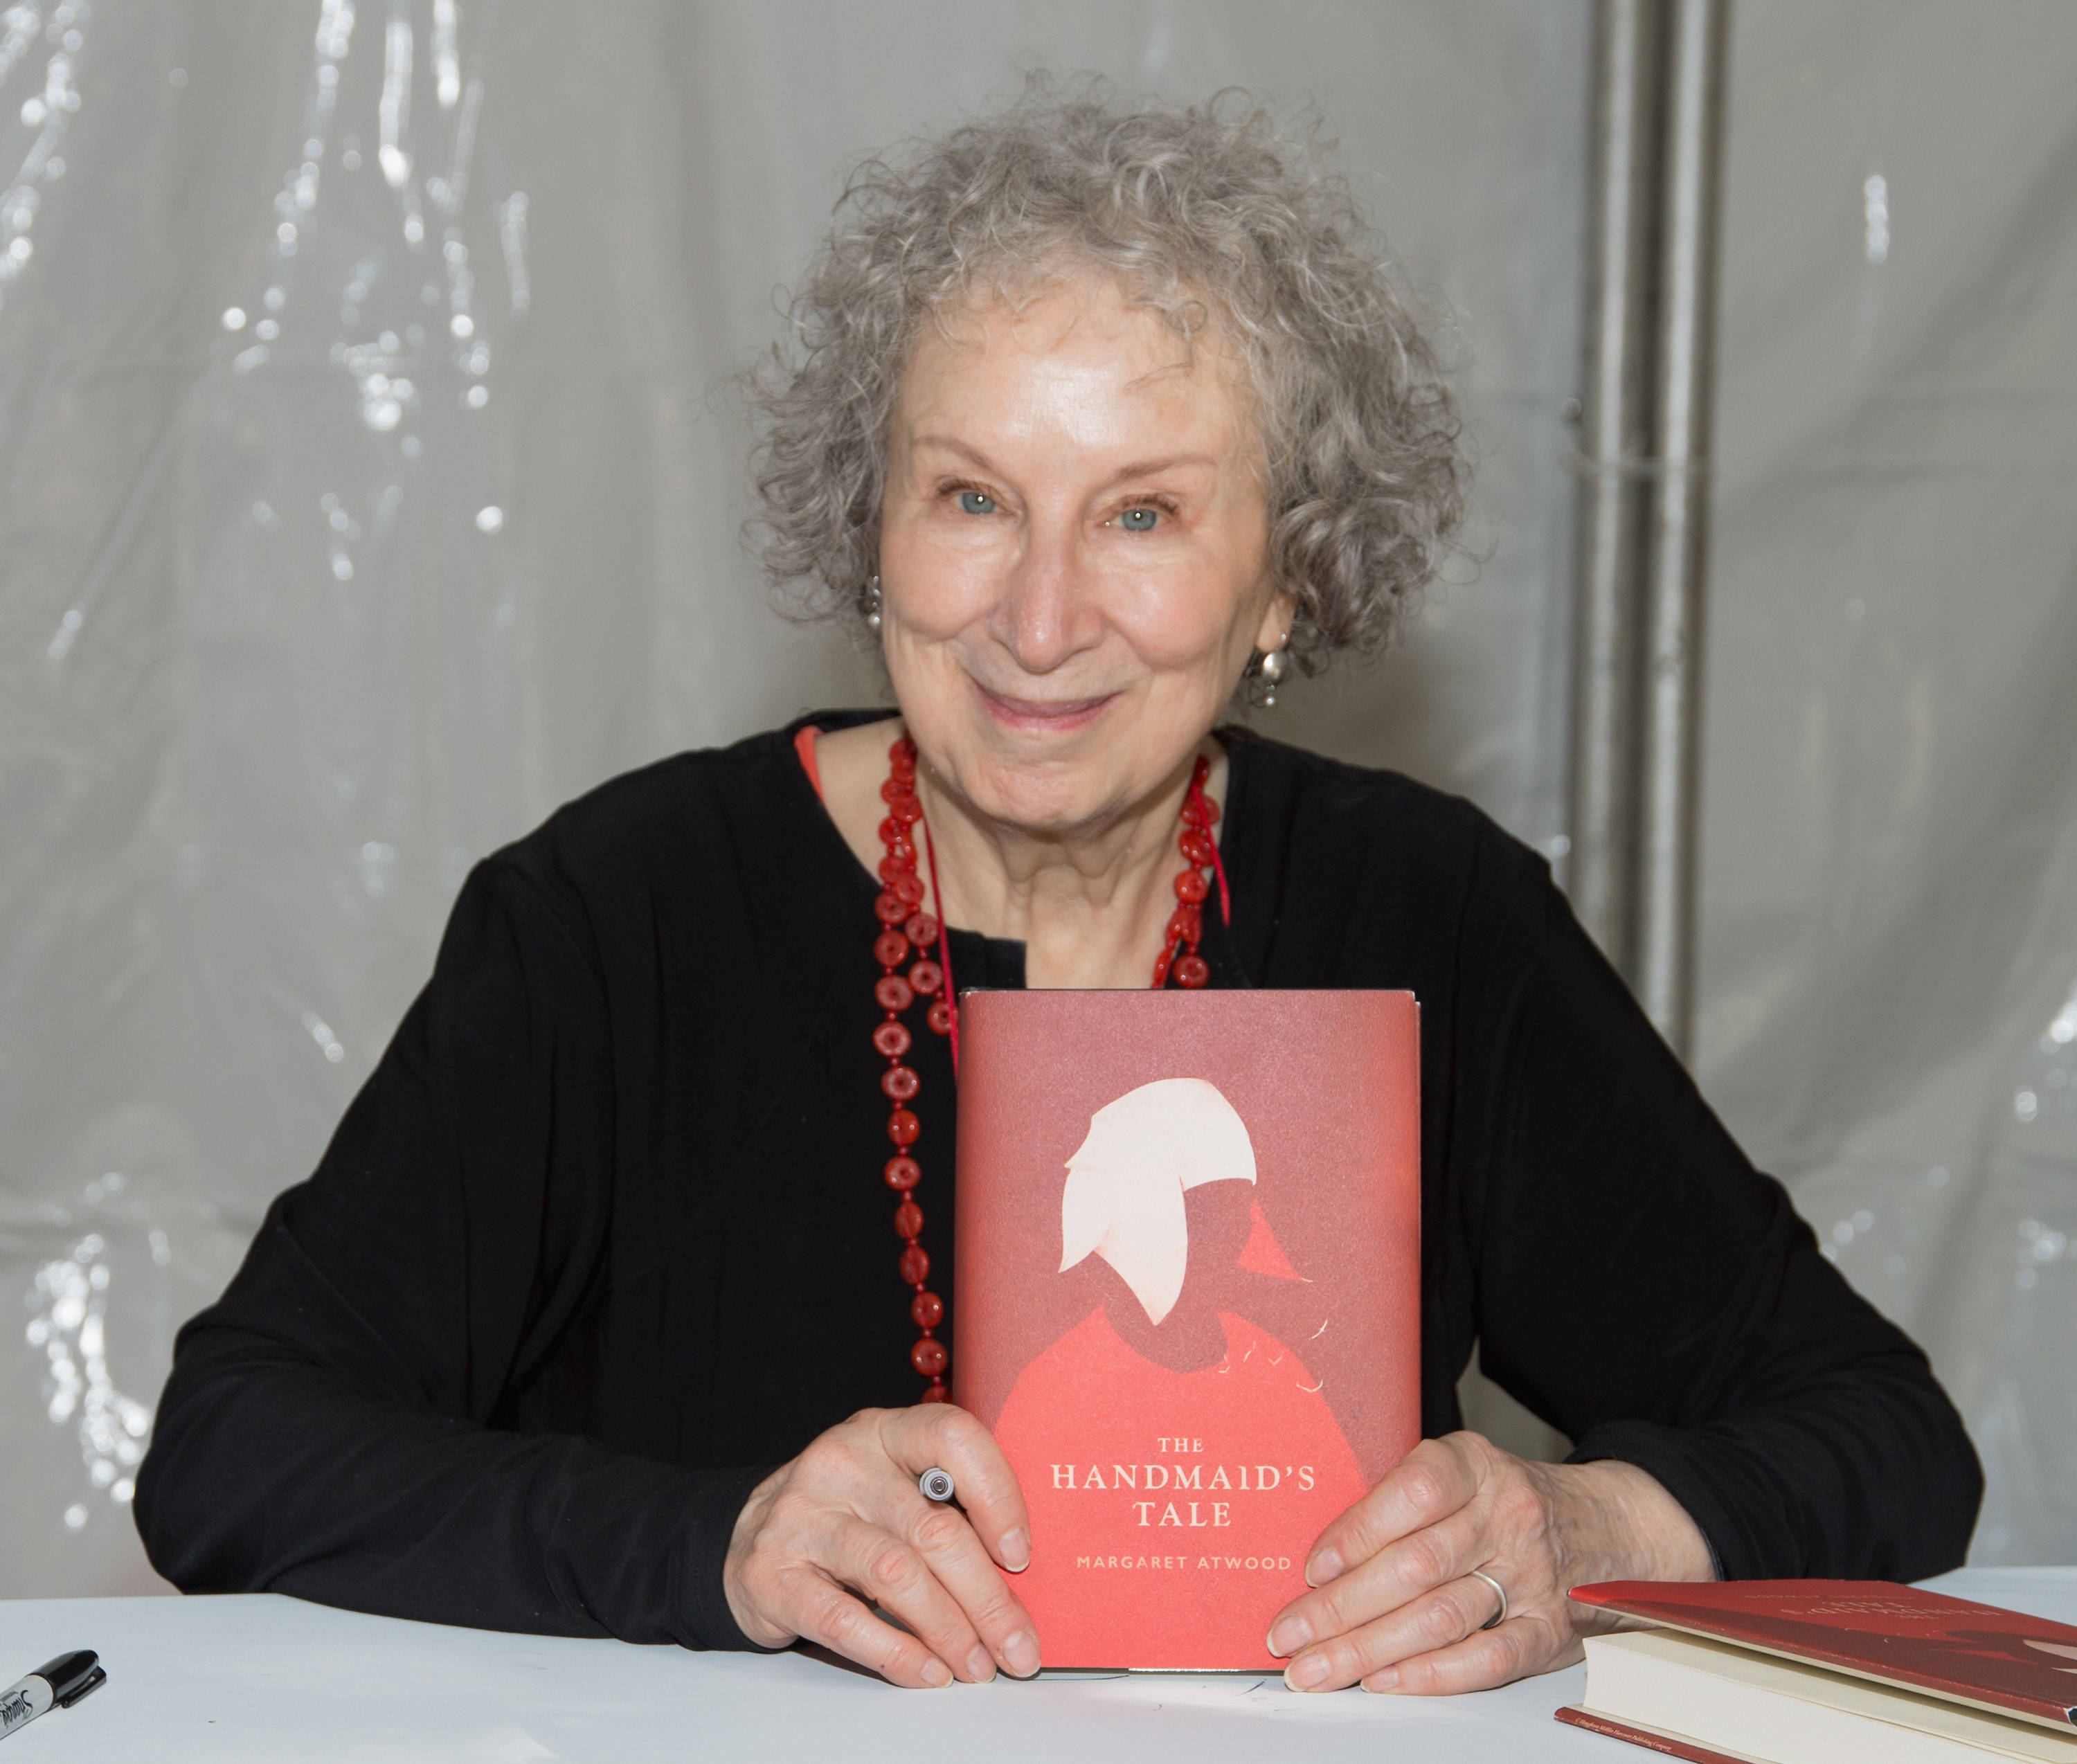 Copies of &#x27;The Testaments&#x27; are on show as Canadian author Margaret Atwood poses during a photocall